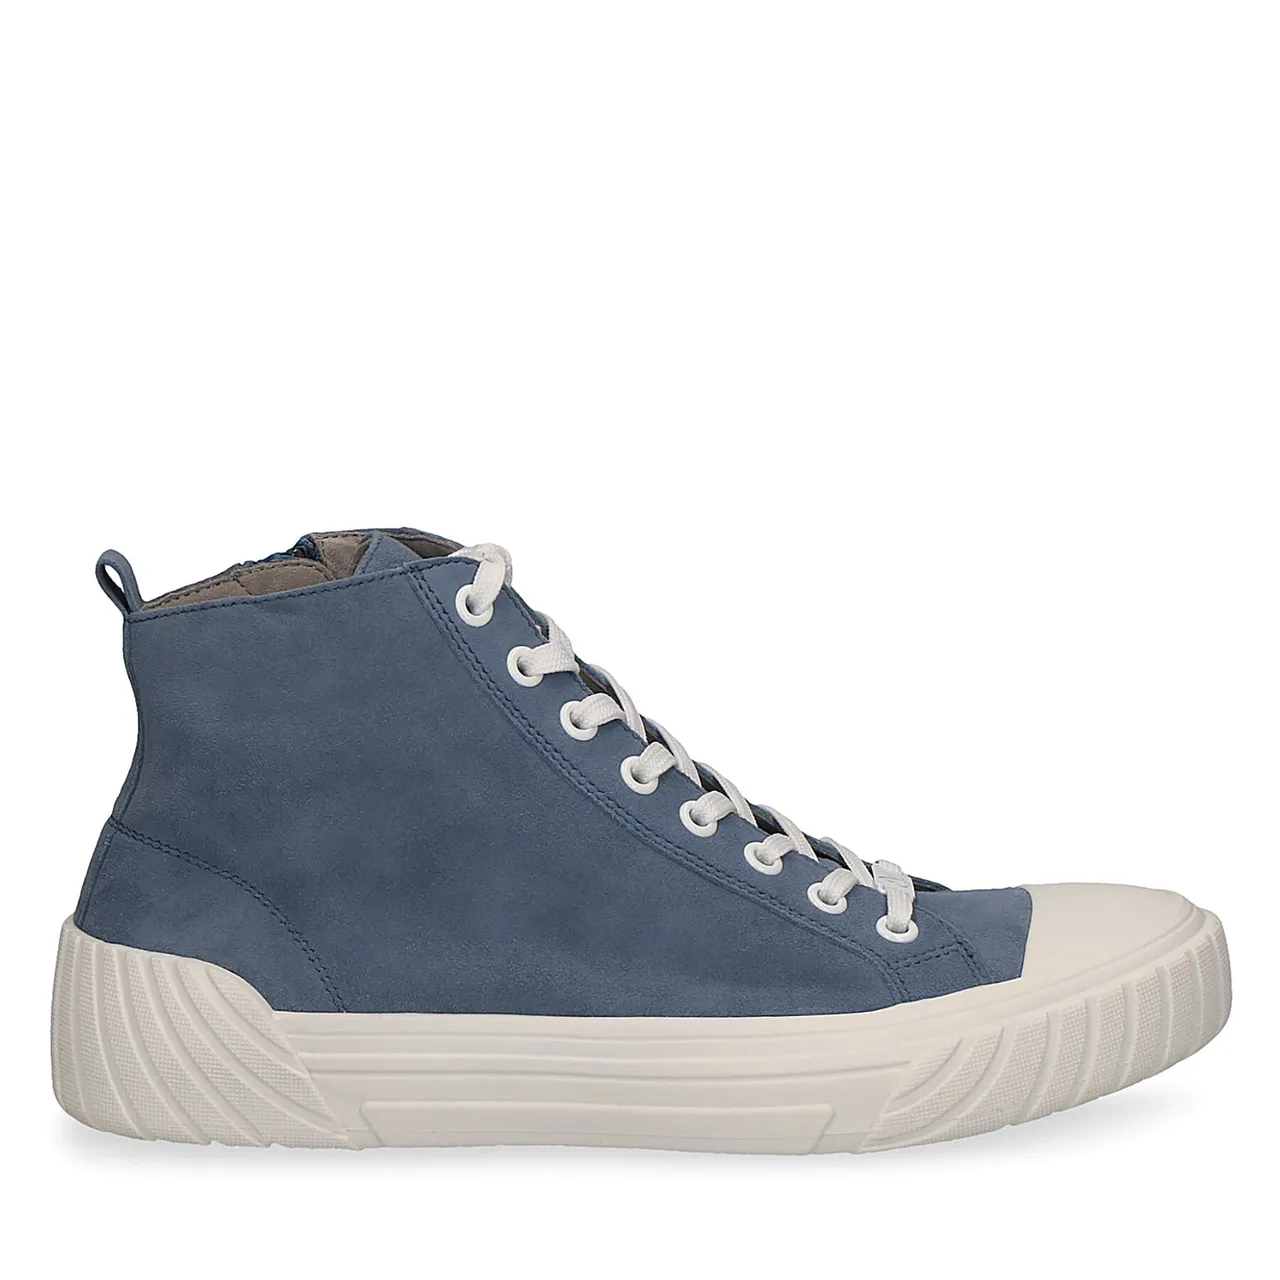 Sneakers aus Stoff Caprice 9-25250-20 Blue Suede 818